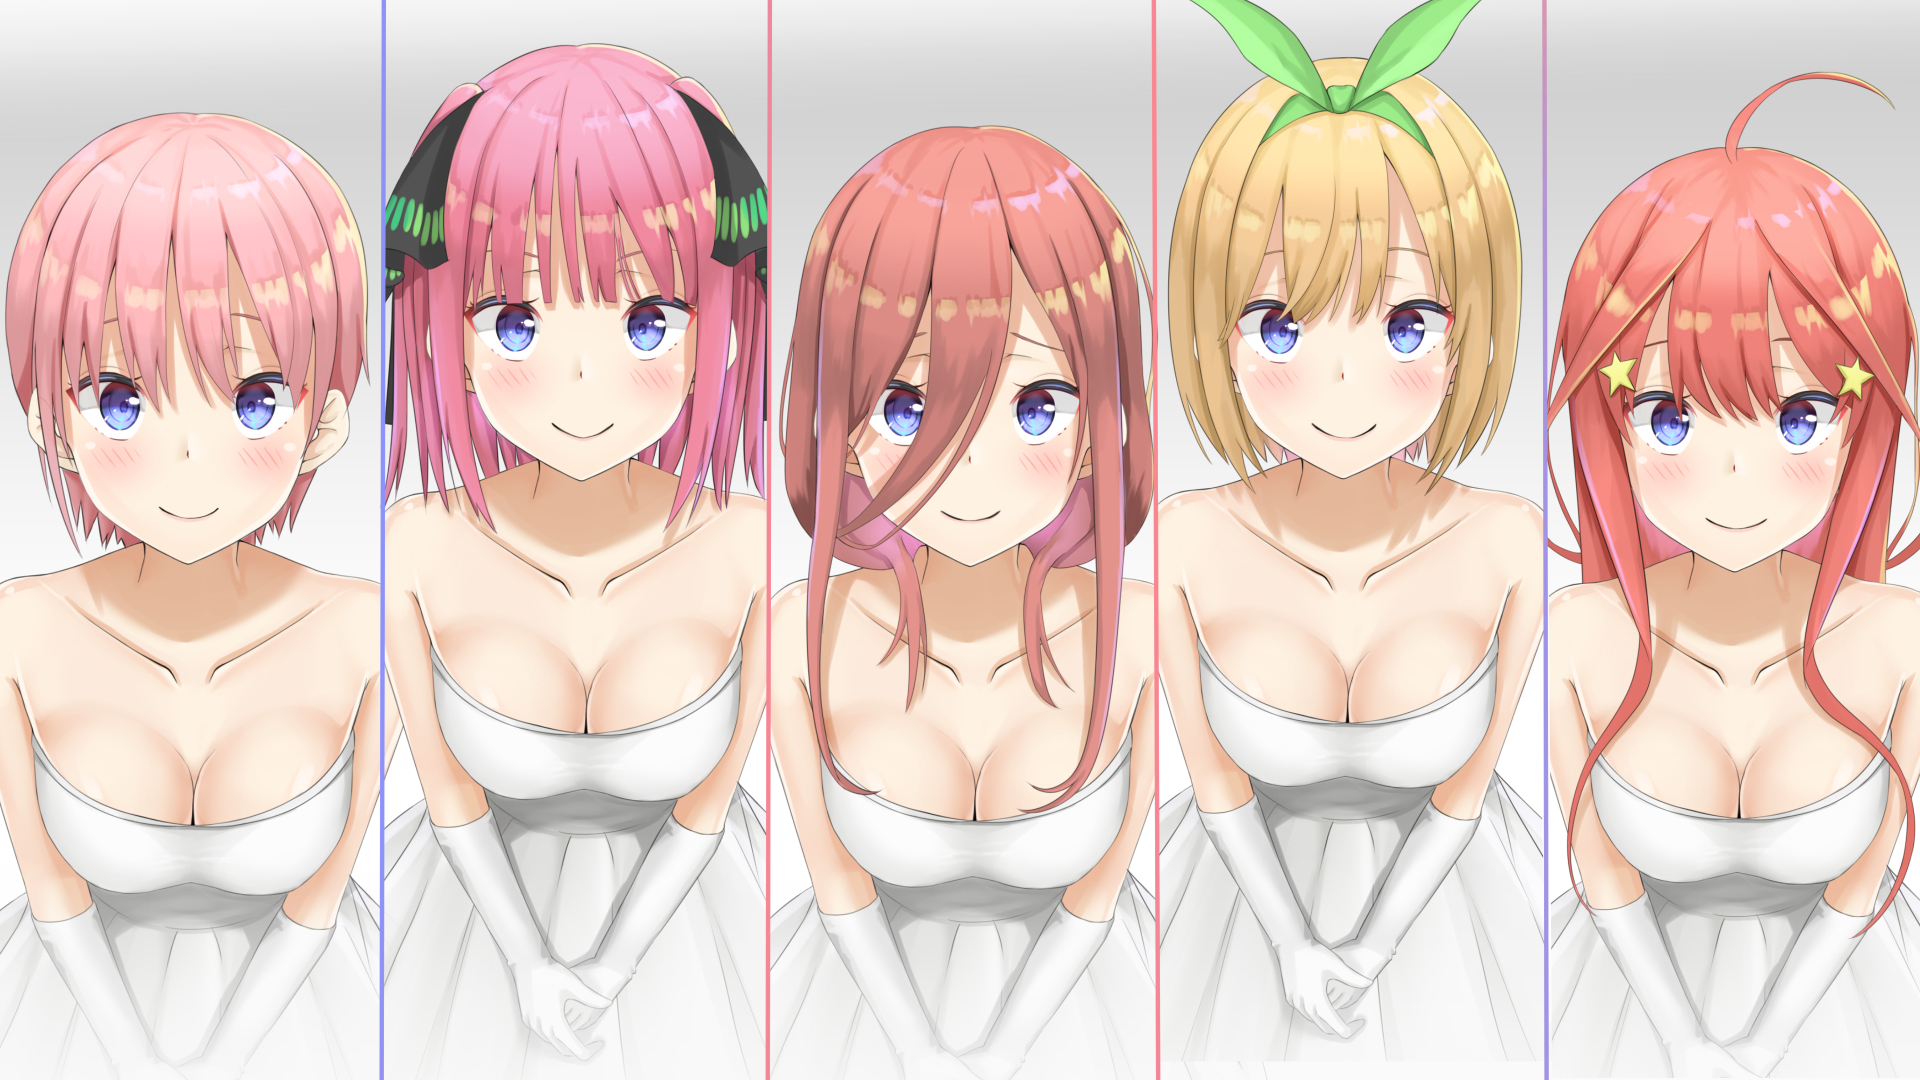 The Quintessential Quintuplets HD Wallpaper by Plu. 